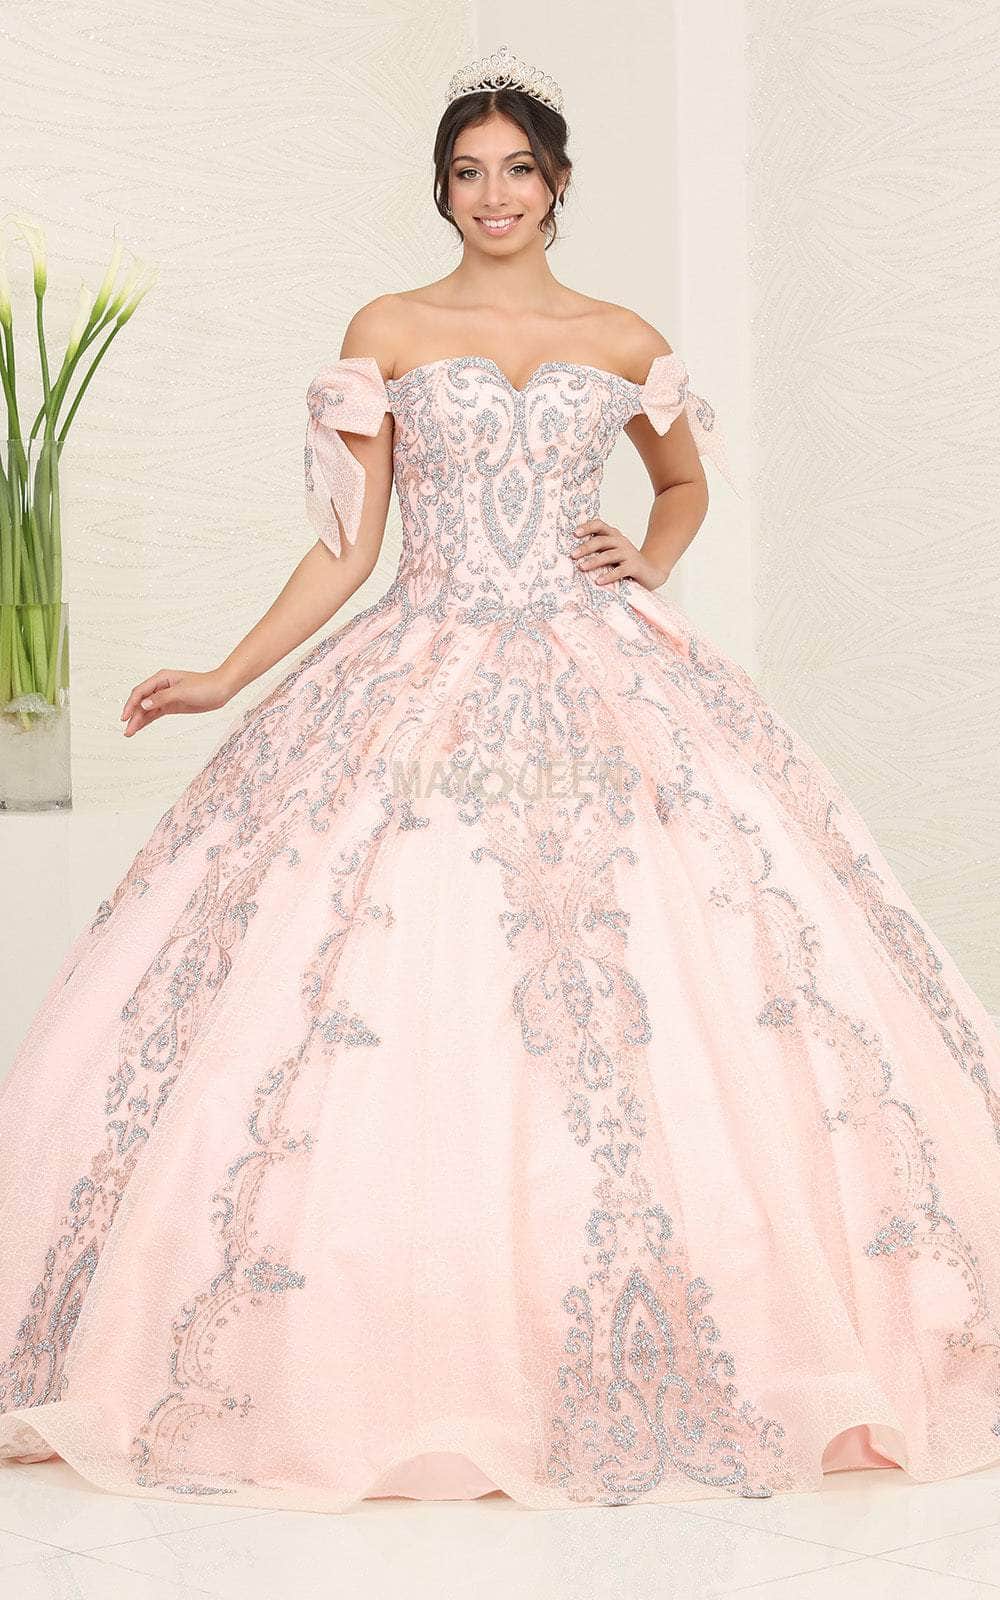 May Queen LK241 - Bow Strap Ballgown
